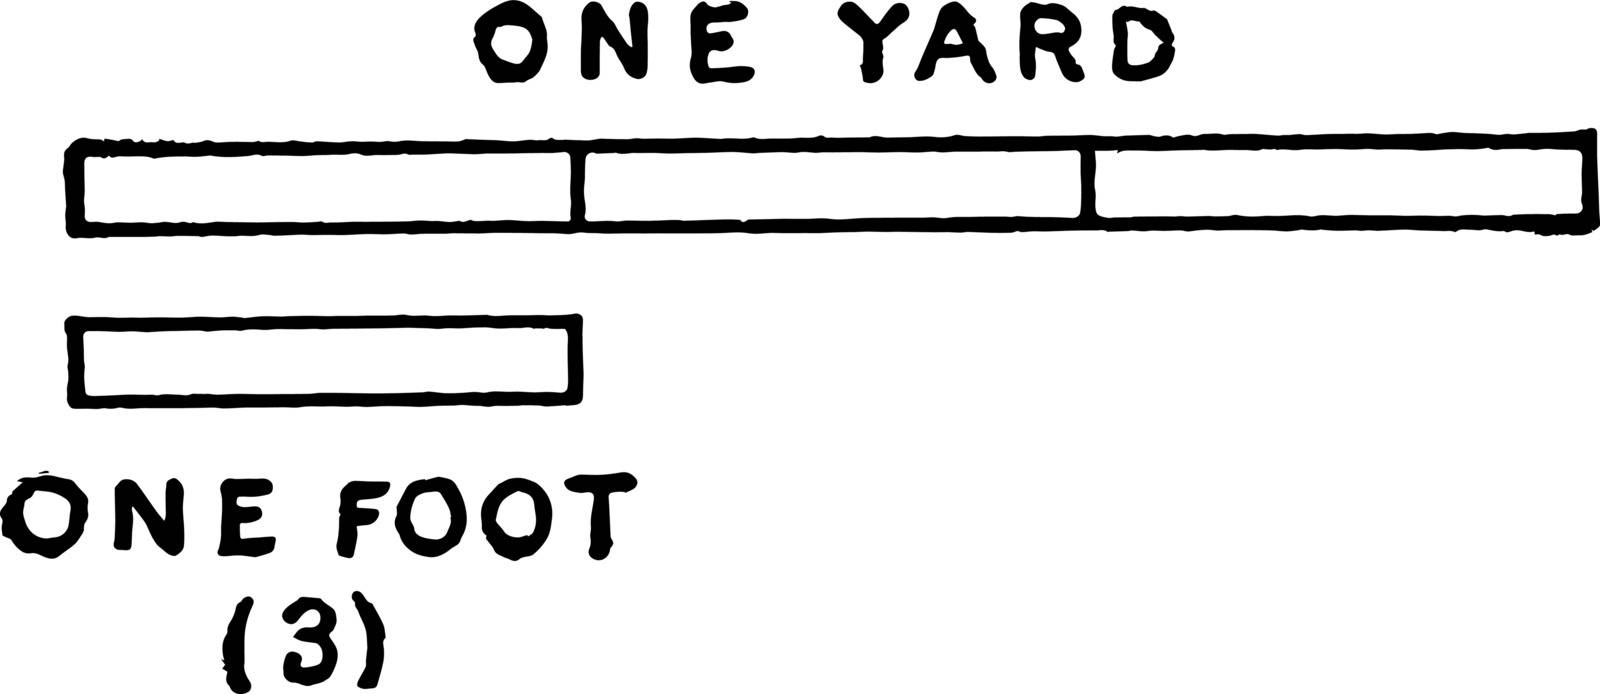 Yard And Foot vintage illustration.  by Morphart